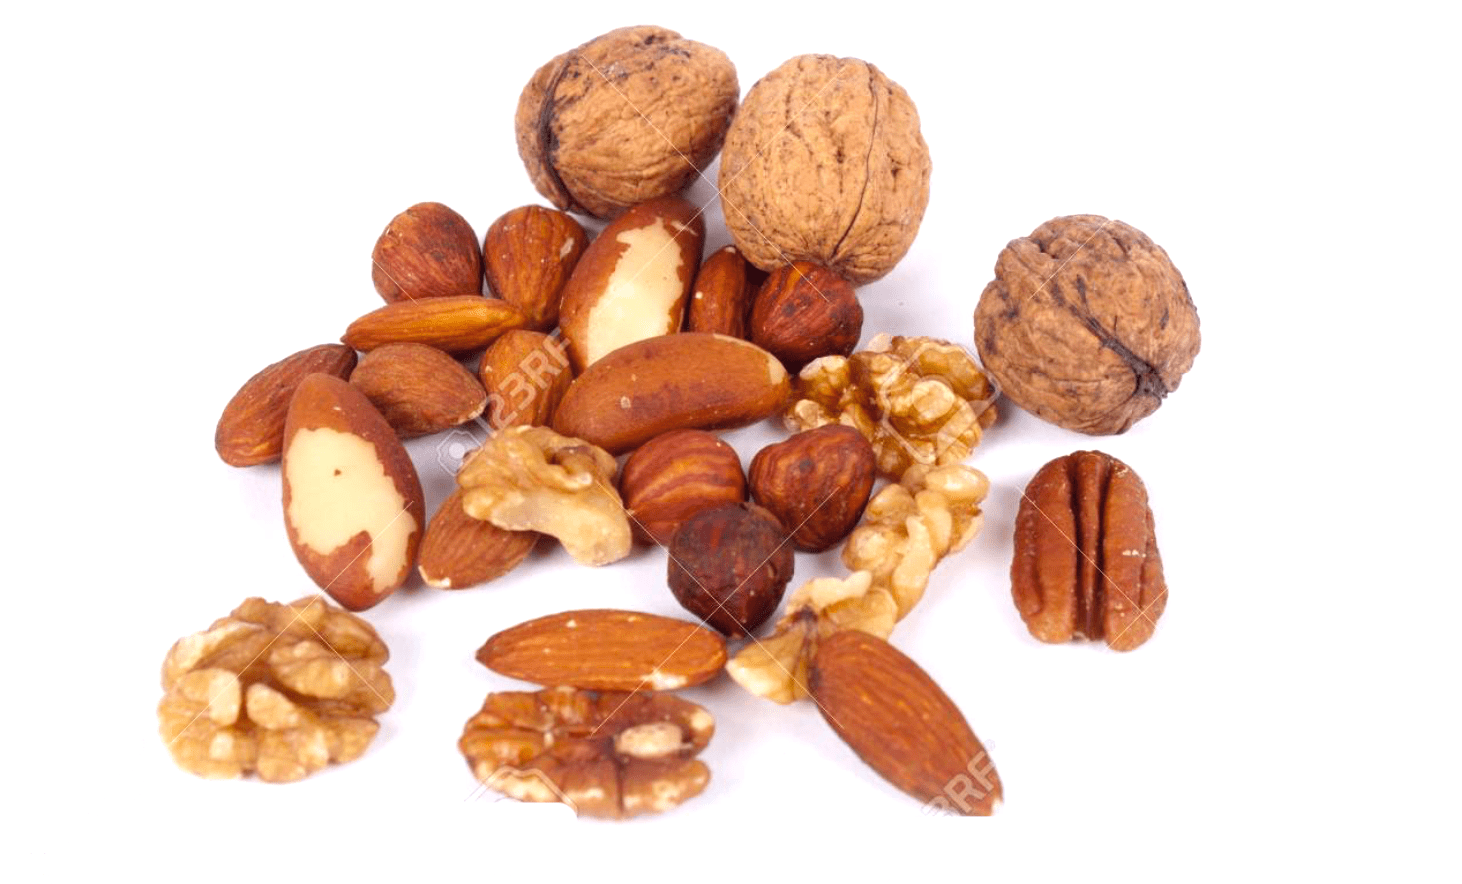 Why soaking nuts and seeds is a good idea?